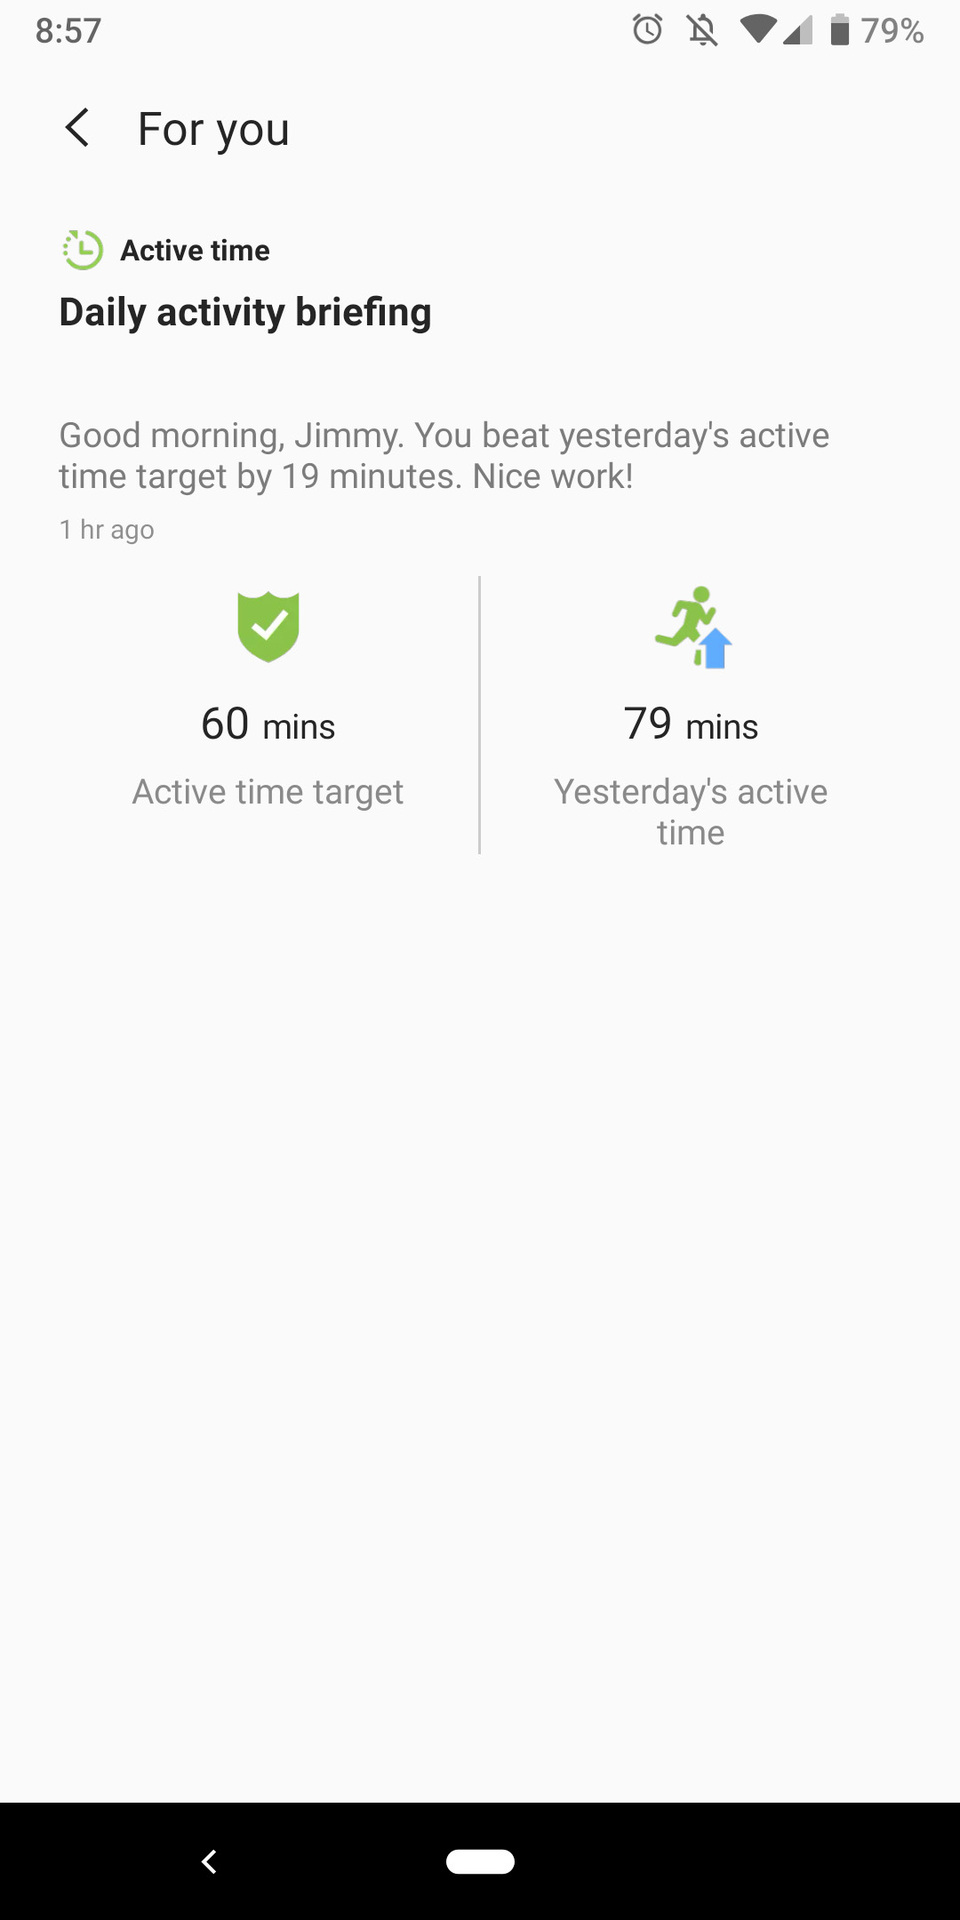 samsung health app insights for you